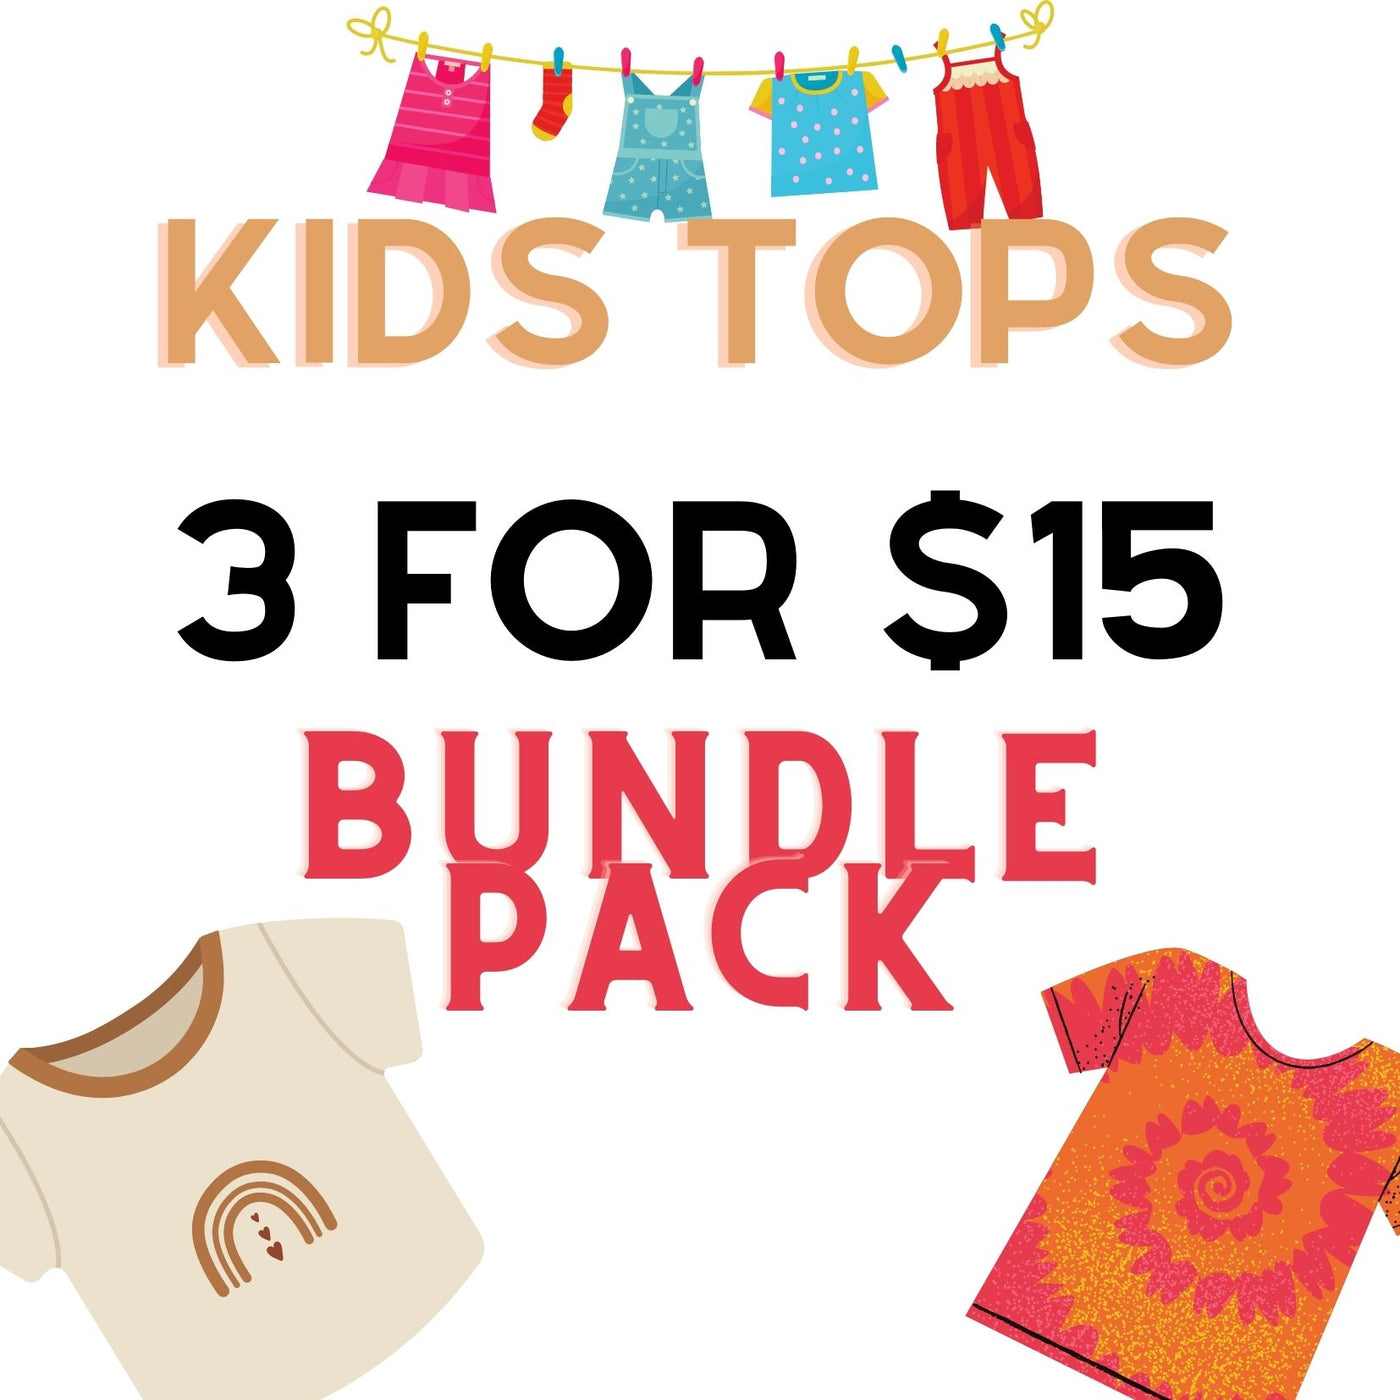 Kids tops 3 for $9